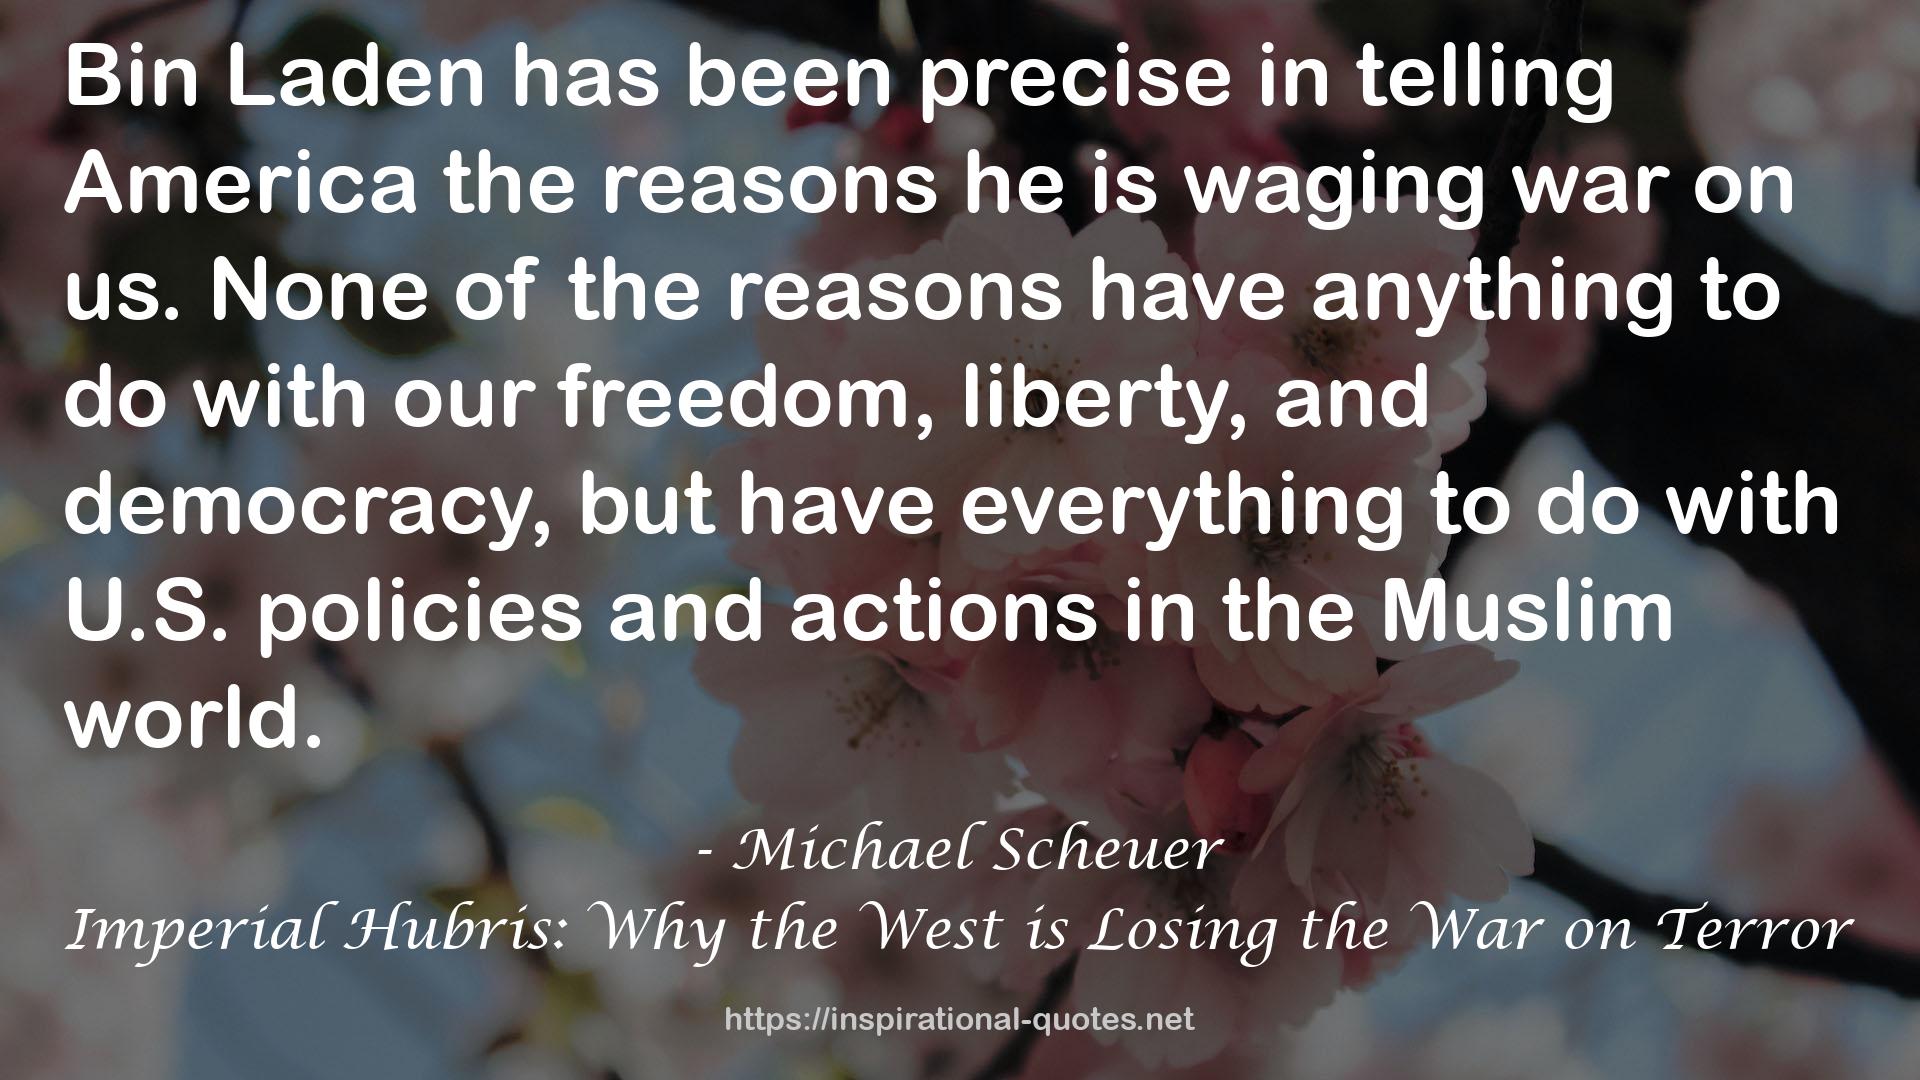 Imperial Hubris: Why the West is Losing the War on Terror QUOTES